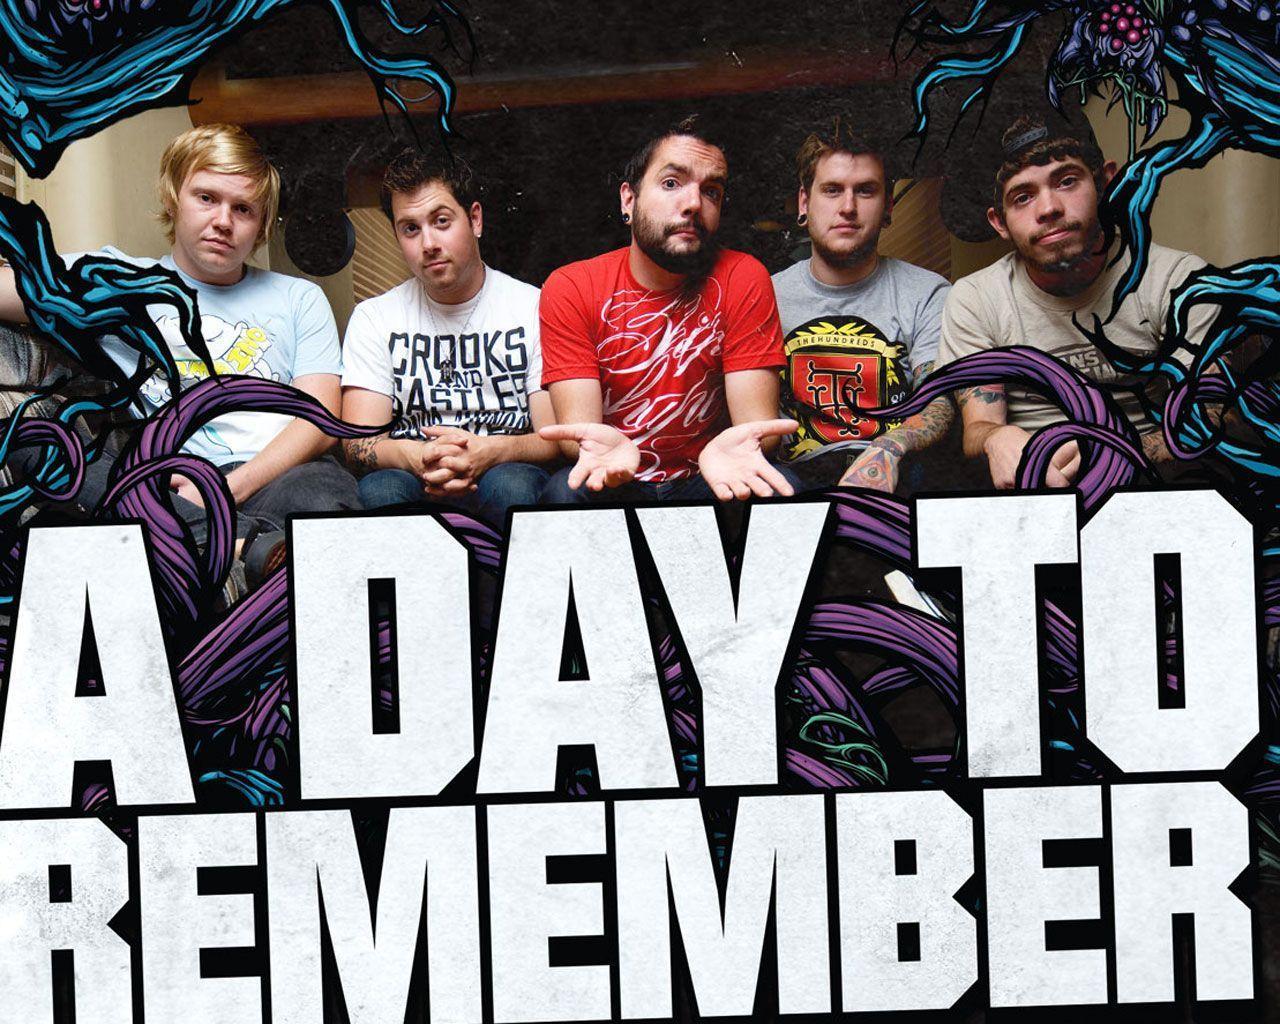 A Day To Remember Wallpaper Wallpaper for HD 1280x1024PX